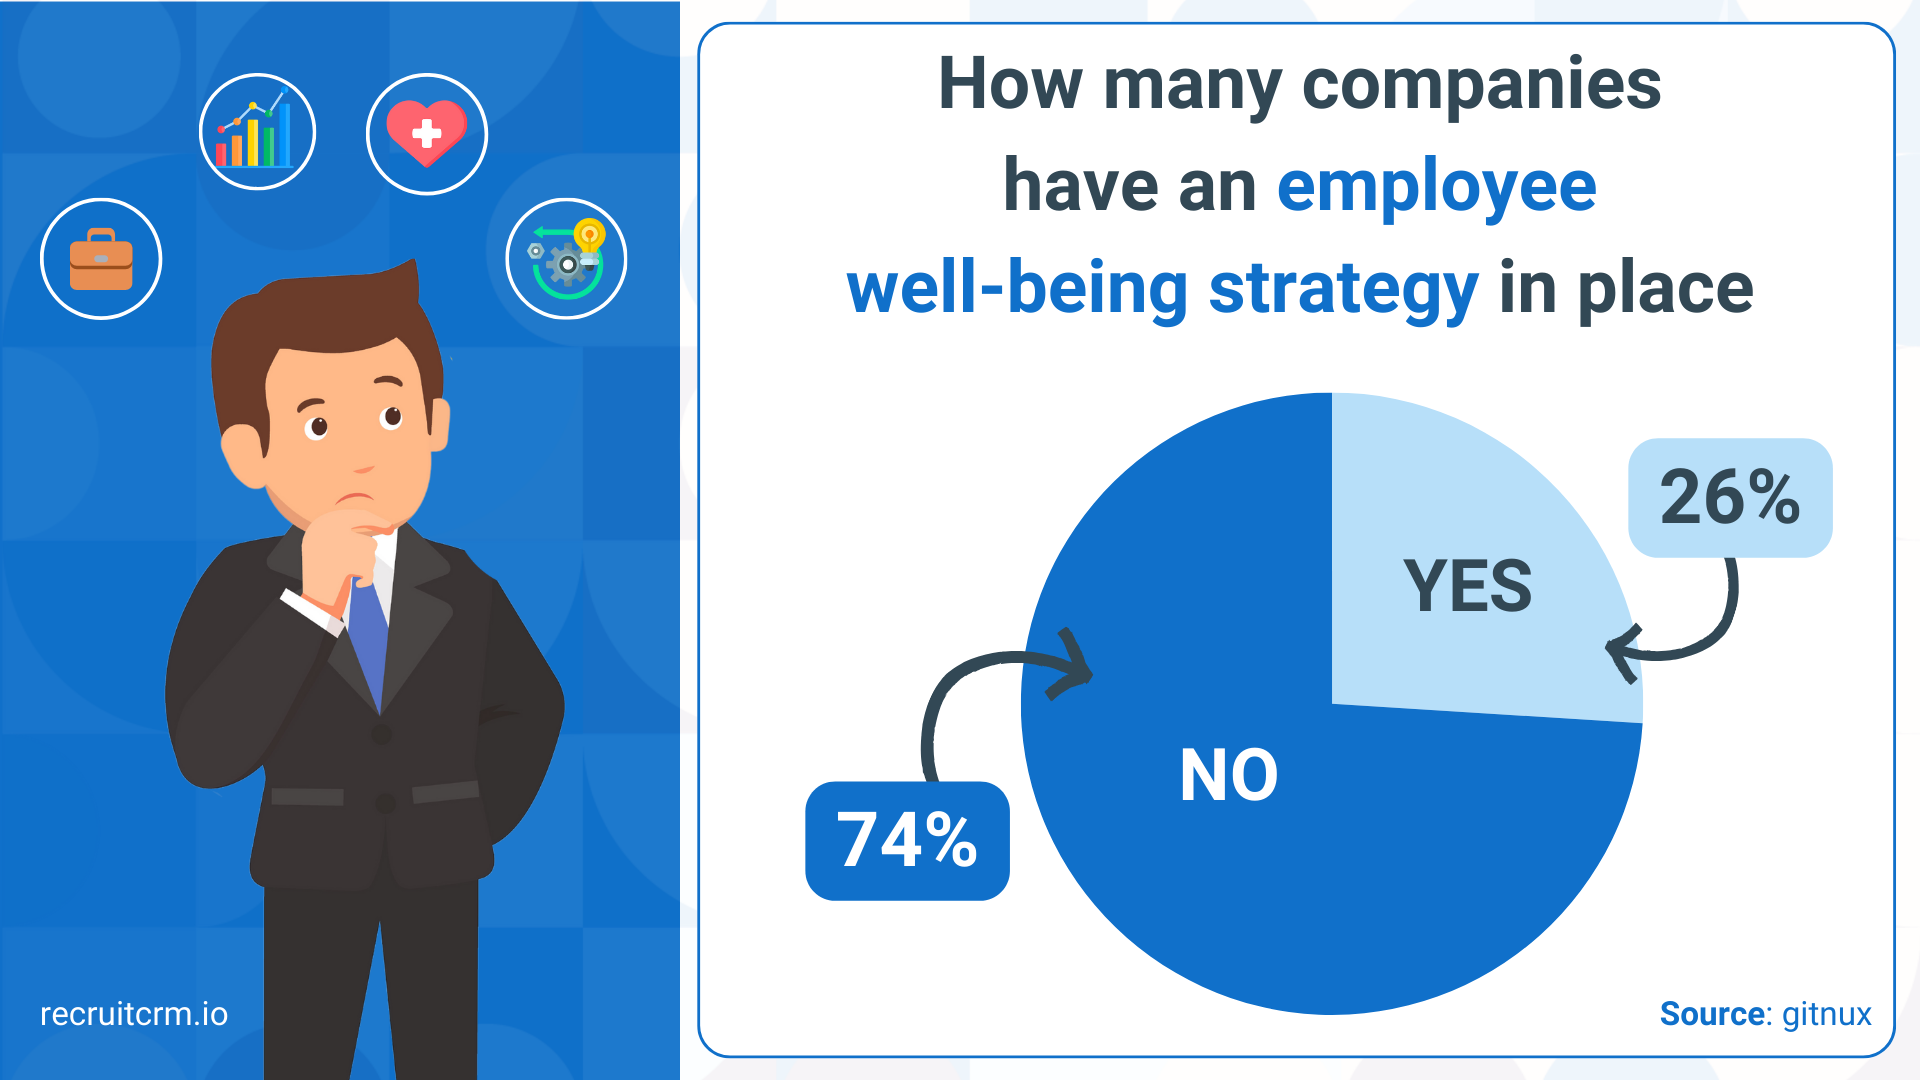 Stats on employee well-being strategy in place